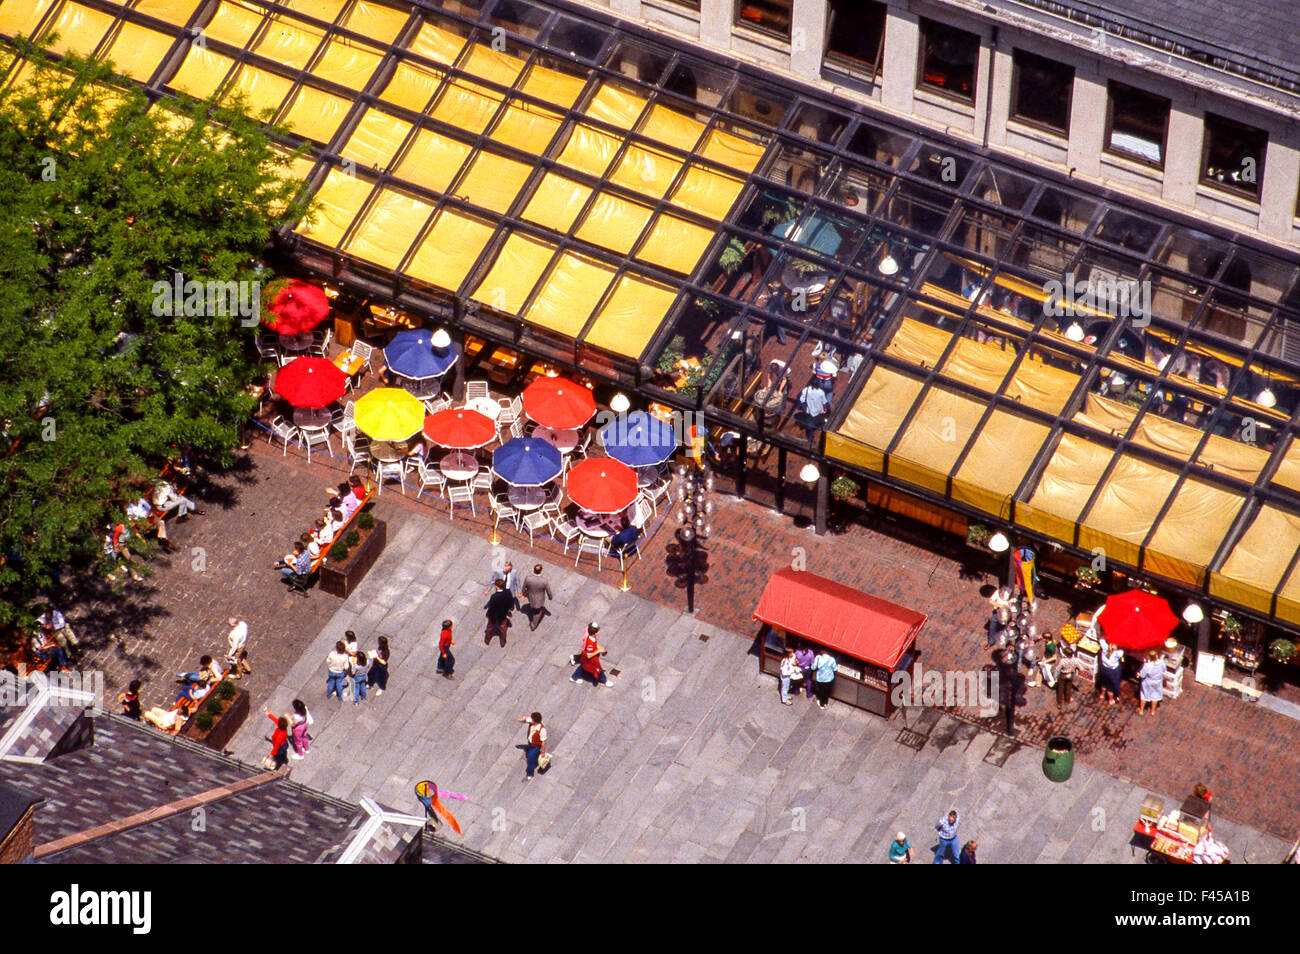 Lunchtime diners gather under outdoor umbrellas at Boston's famous Quincy Market, part of Faneuil Hall Marketplace. Stock Photo